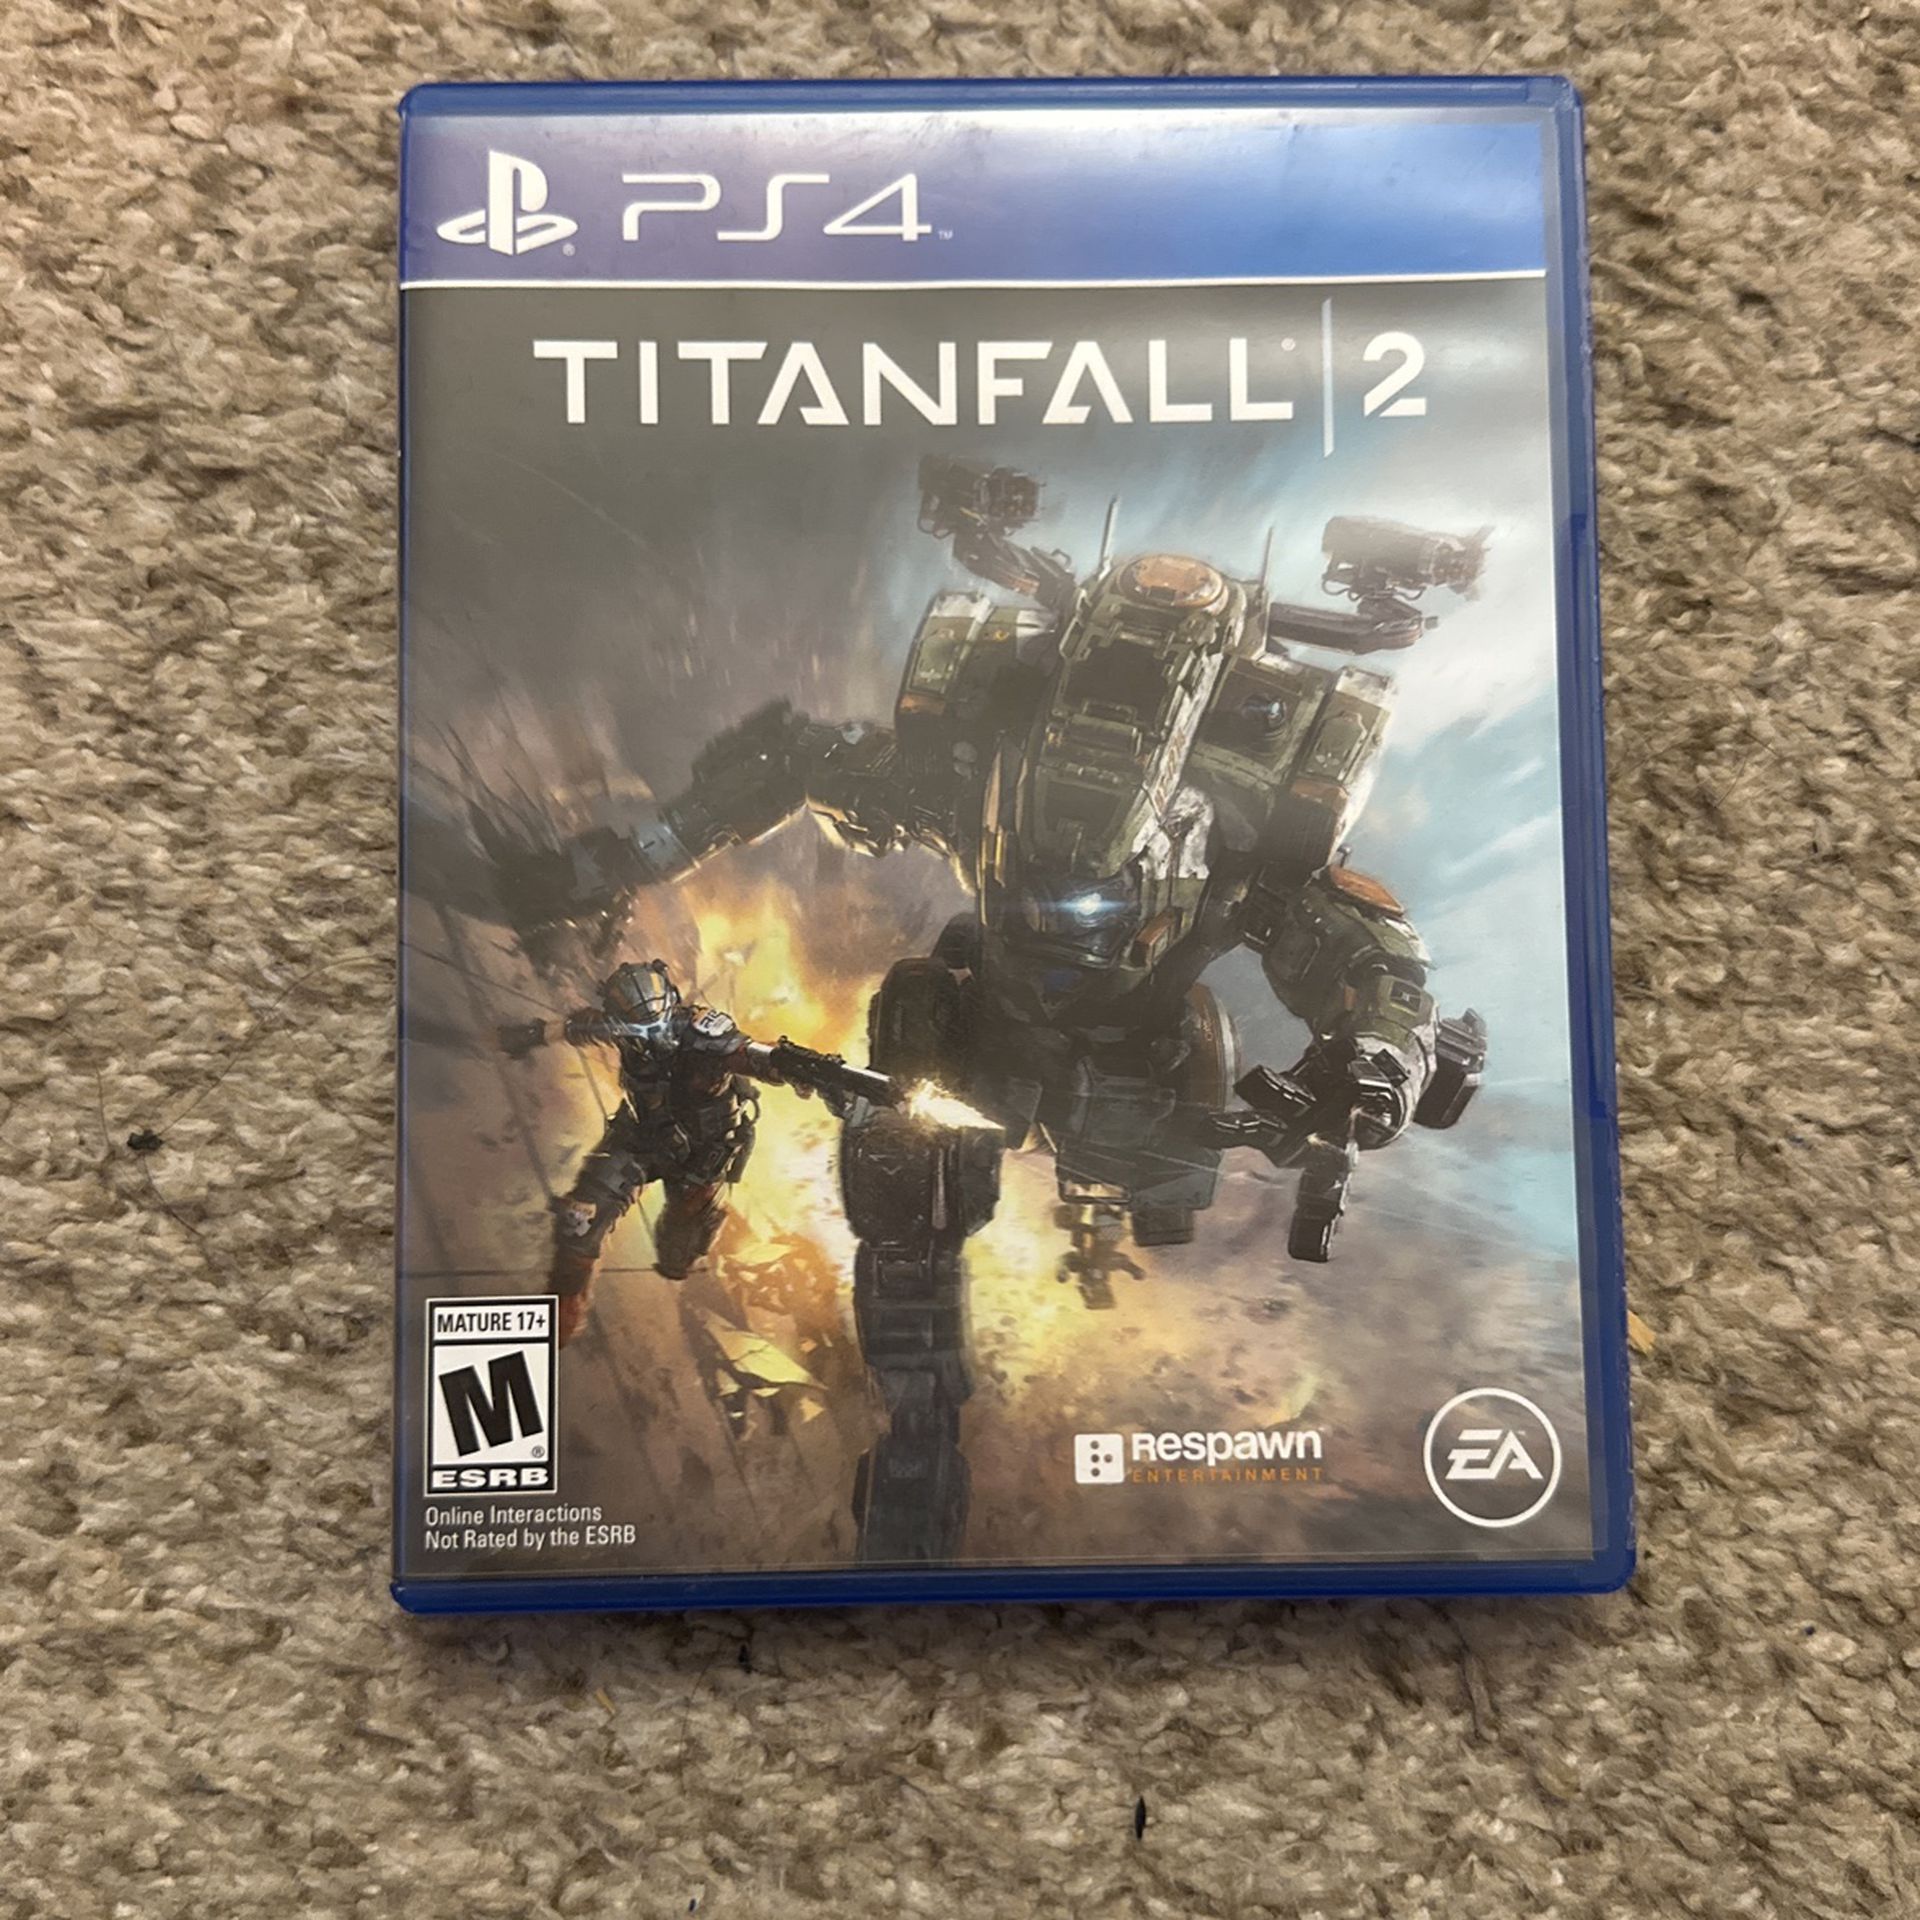 PS4 Titanfall 2 